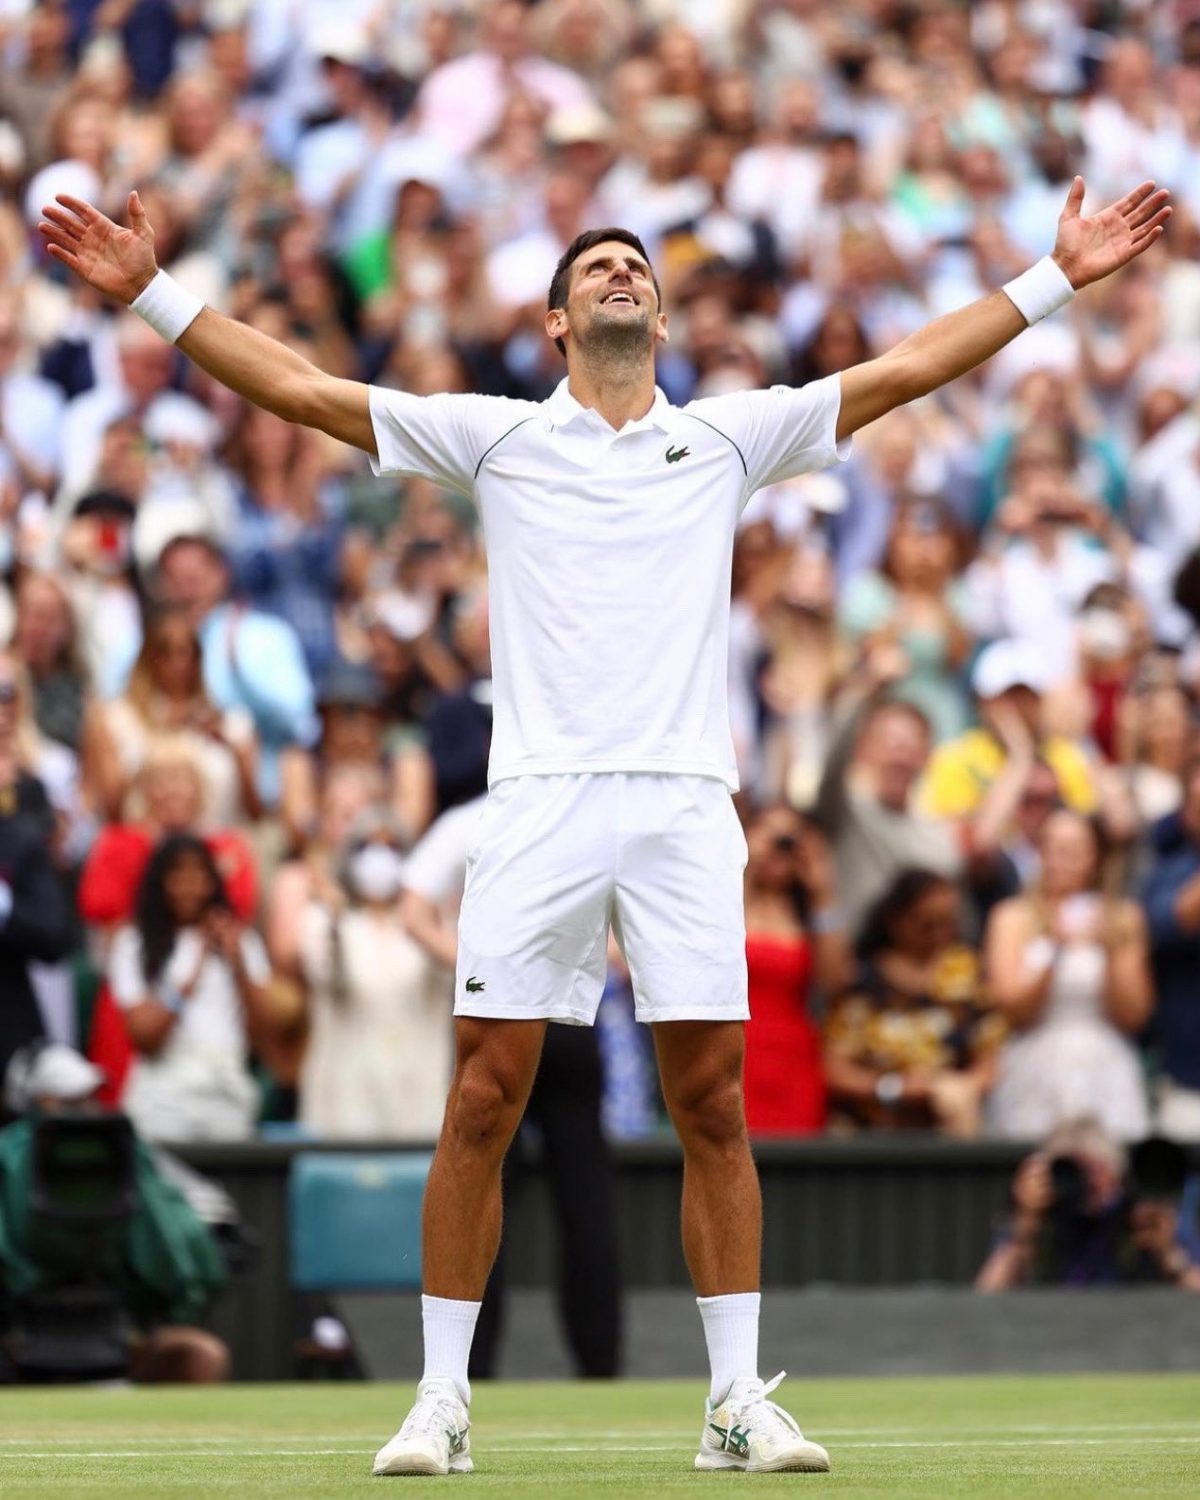 Twenty and counting! Novak Djokovic is now in hallowed company after joining Roger Federer and Rafael Novak at the mountain top of the most grand slam titles.
